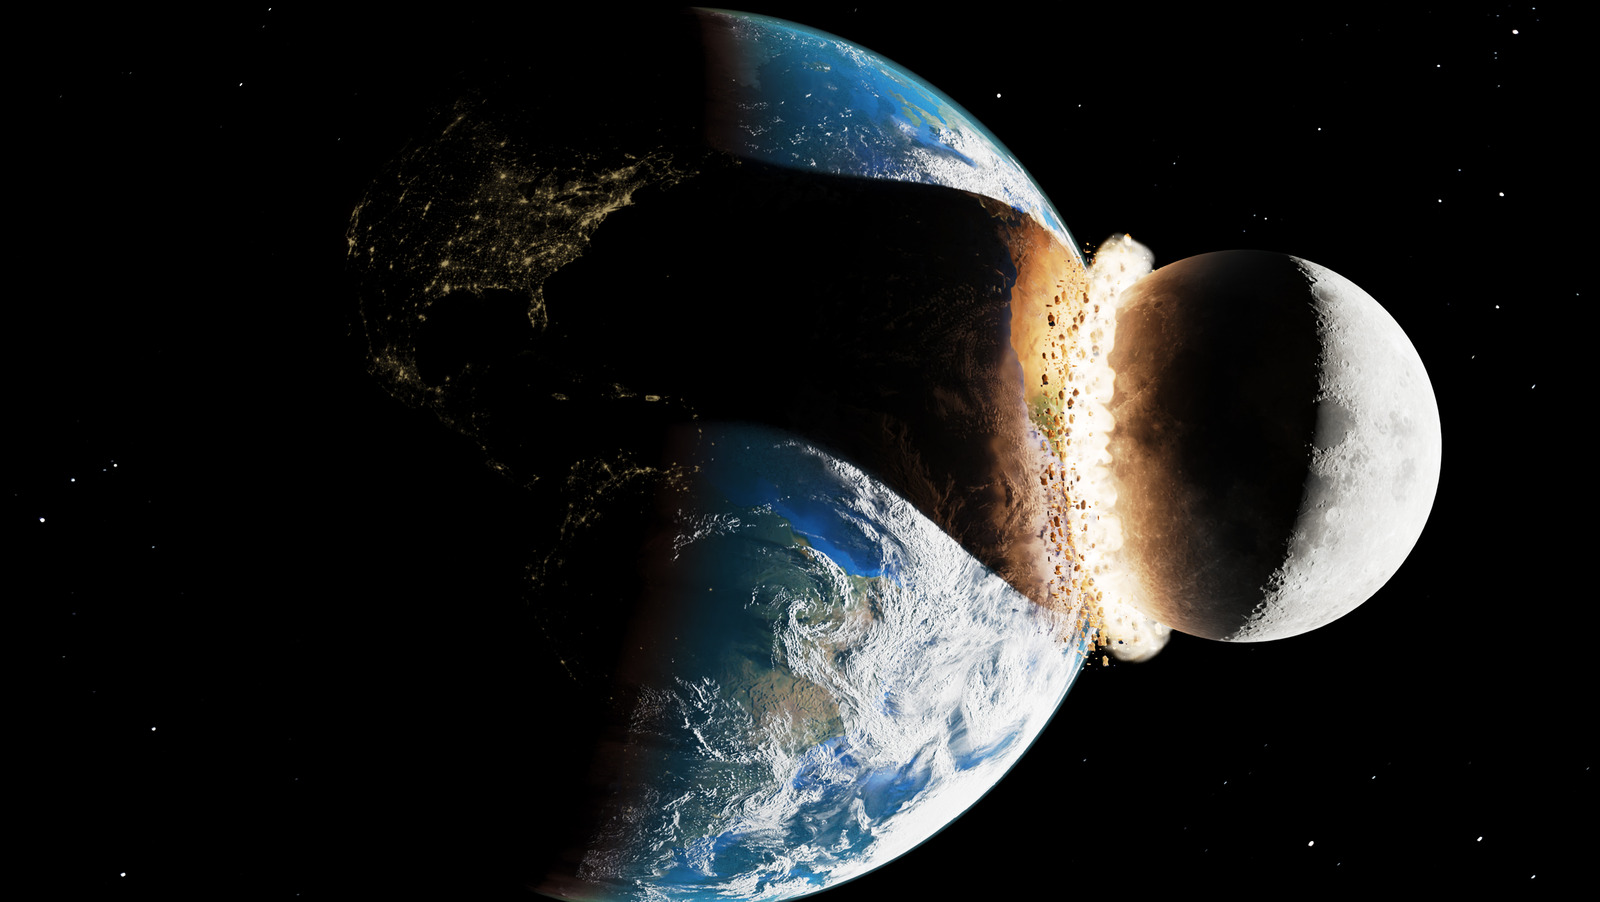 Do you know what will happen if the Earth collides with the Moon? Know 5 facts